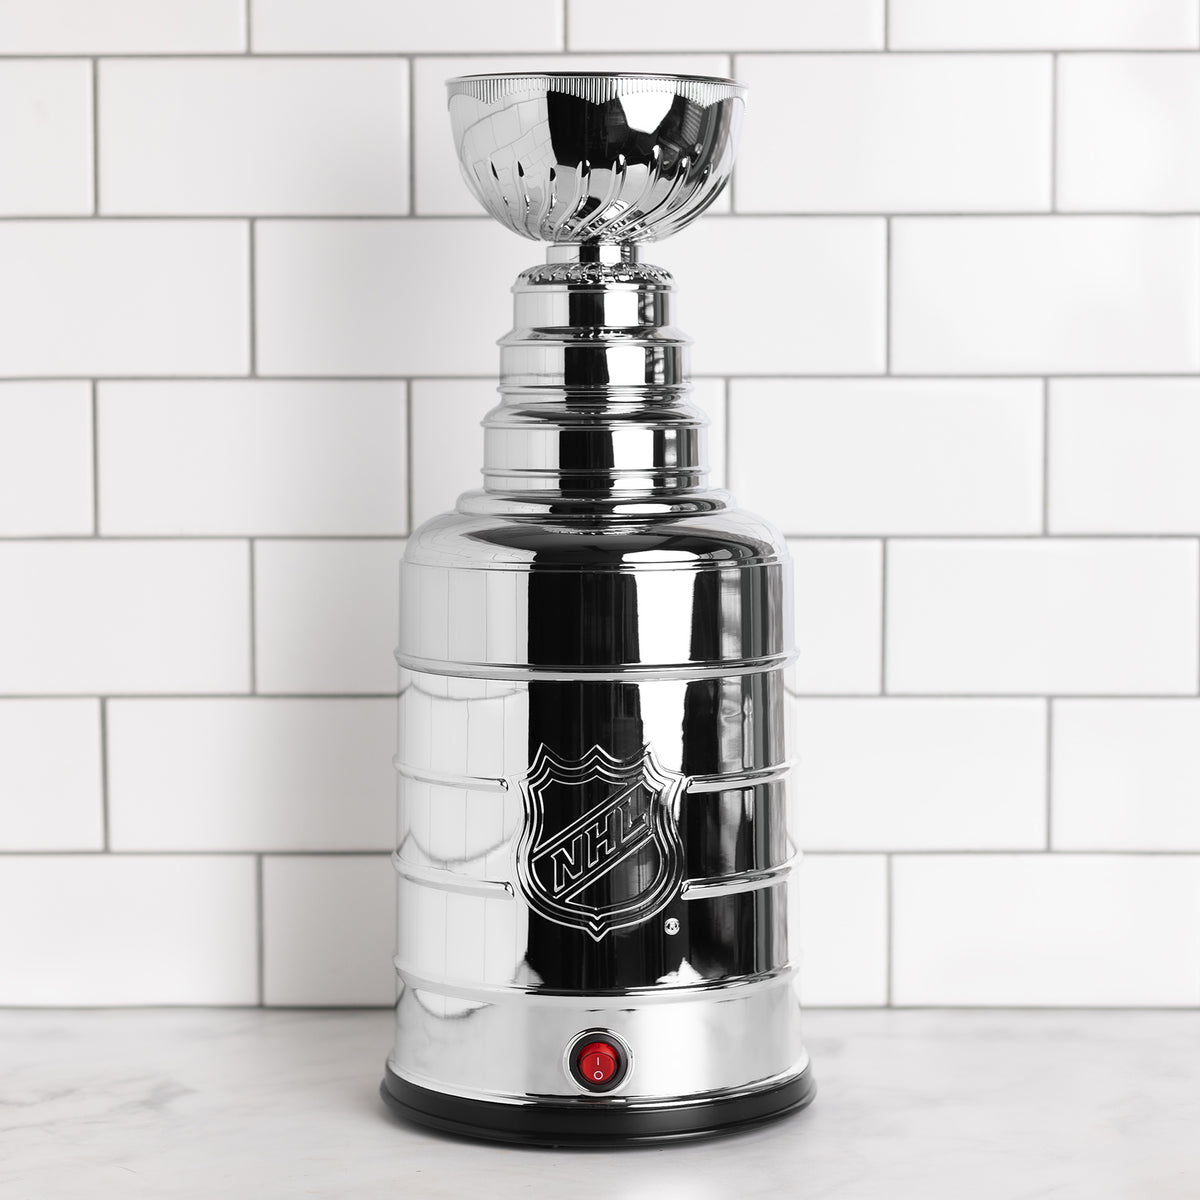 Unboxing the Replica Stanley Cup #ALLCAPS #ALLOURS #NHL #StanleyCup 